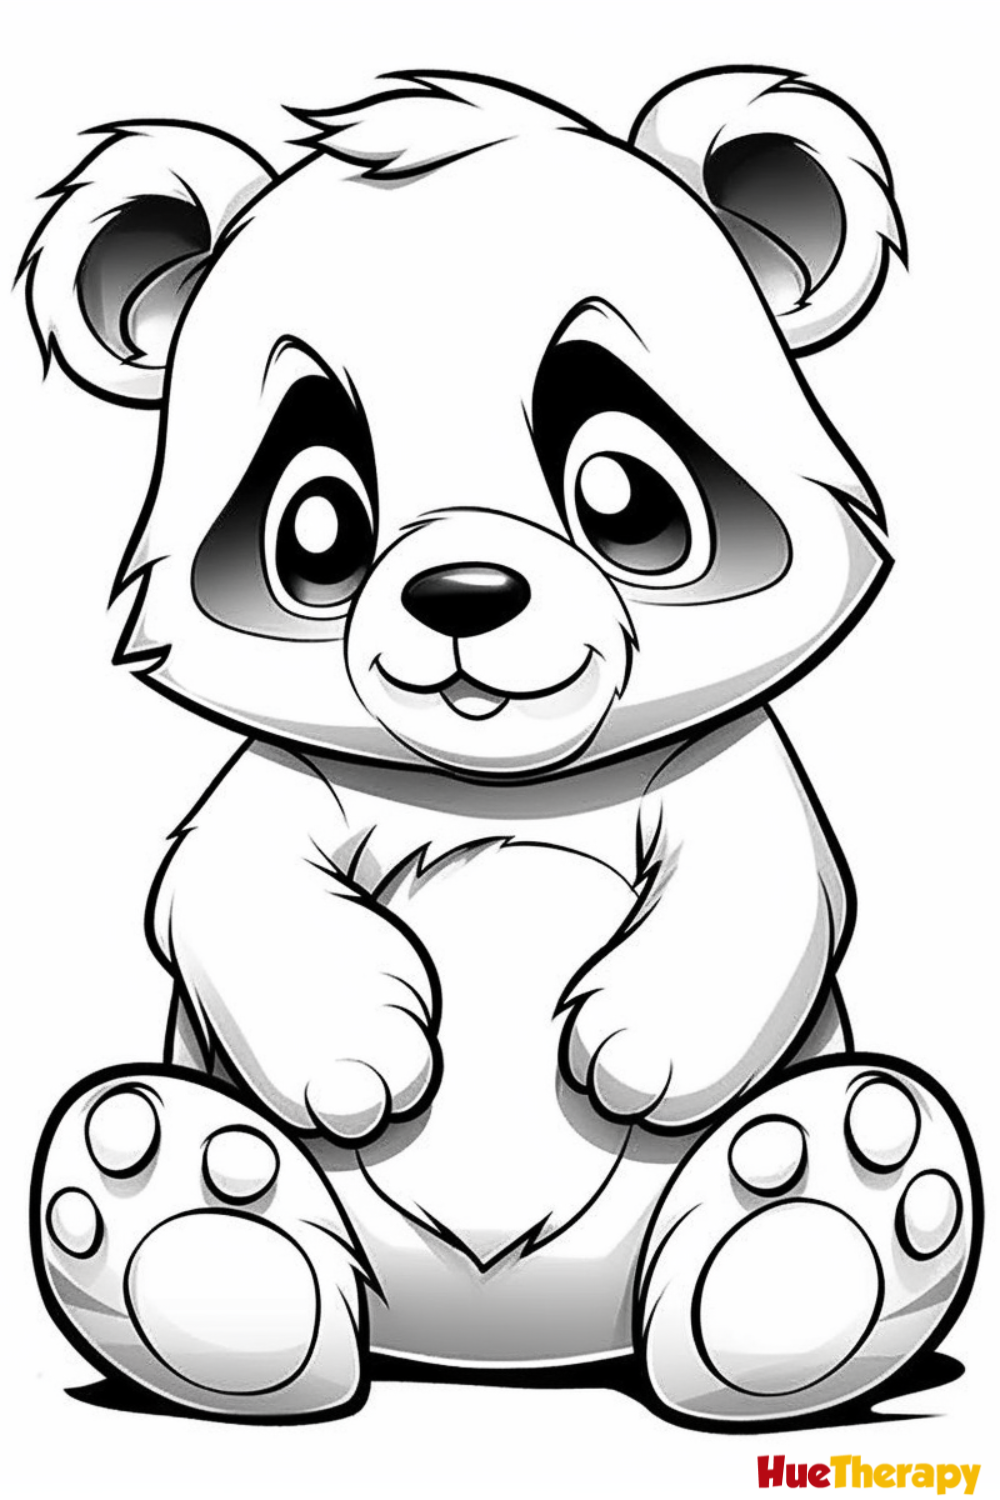 Free printable panda coloring pages for kids panda coloring pages cute monsters drawings cute coloring pages